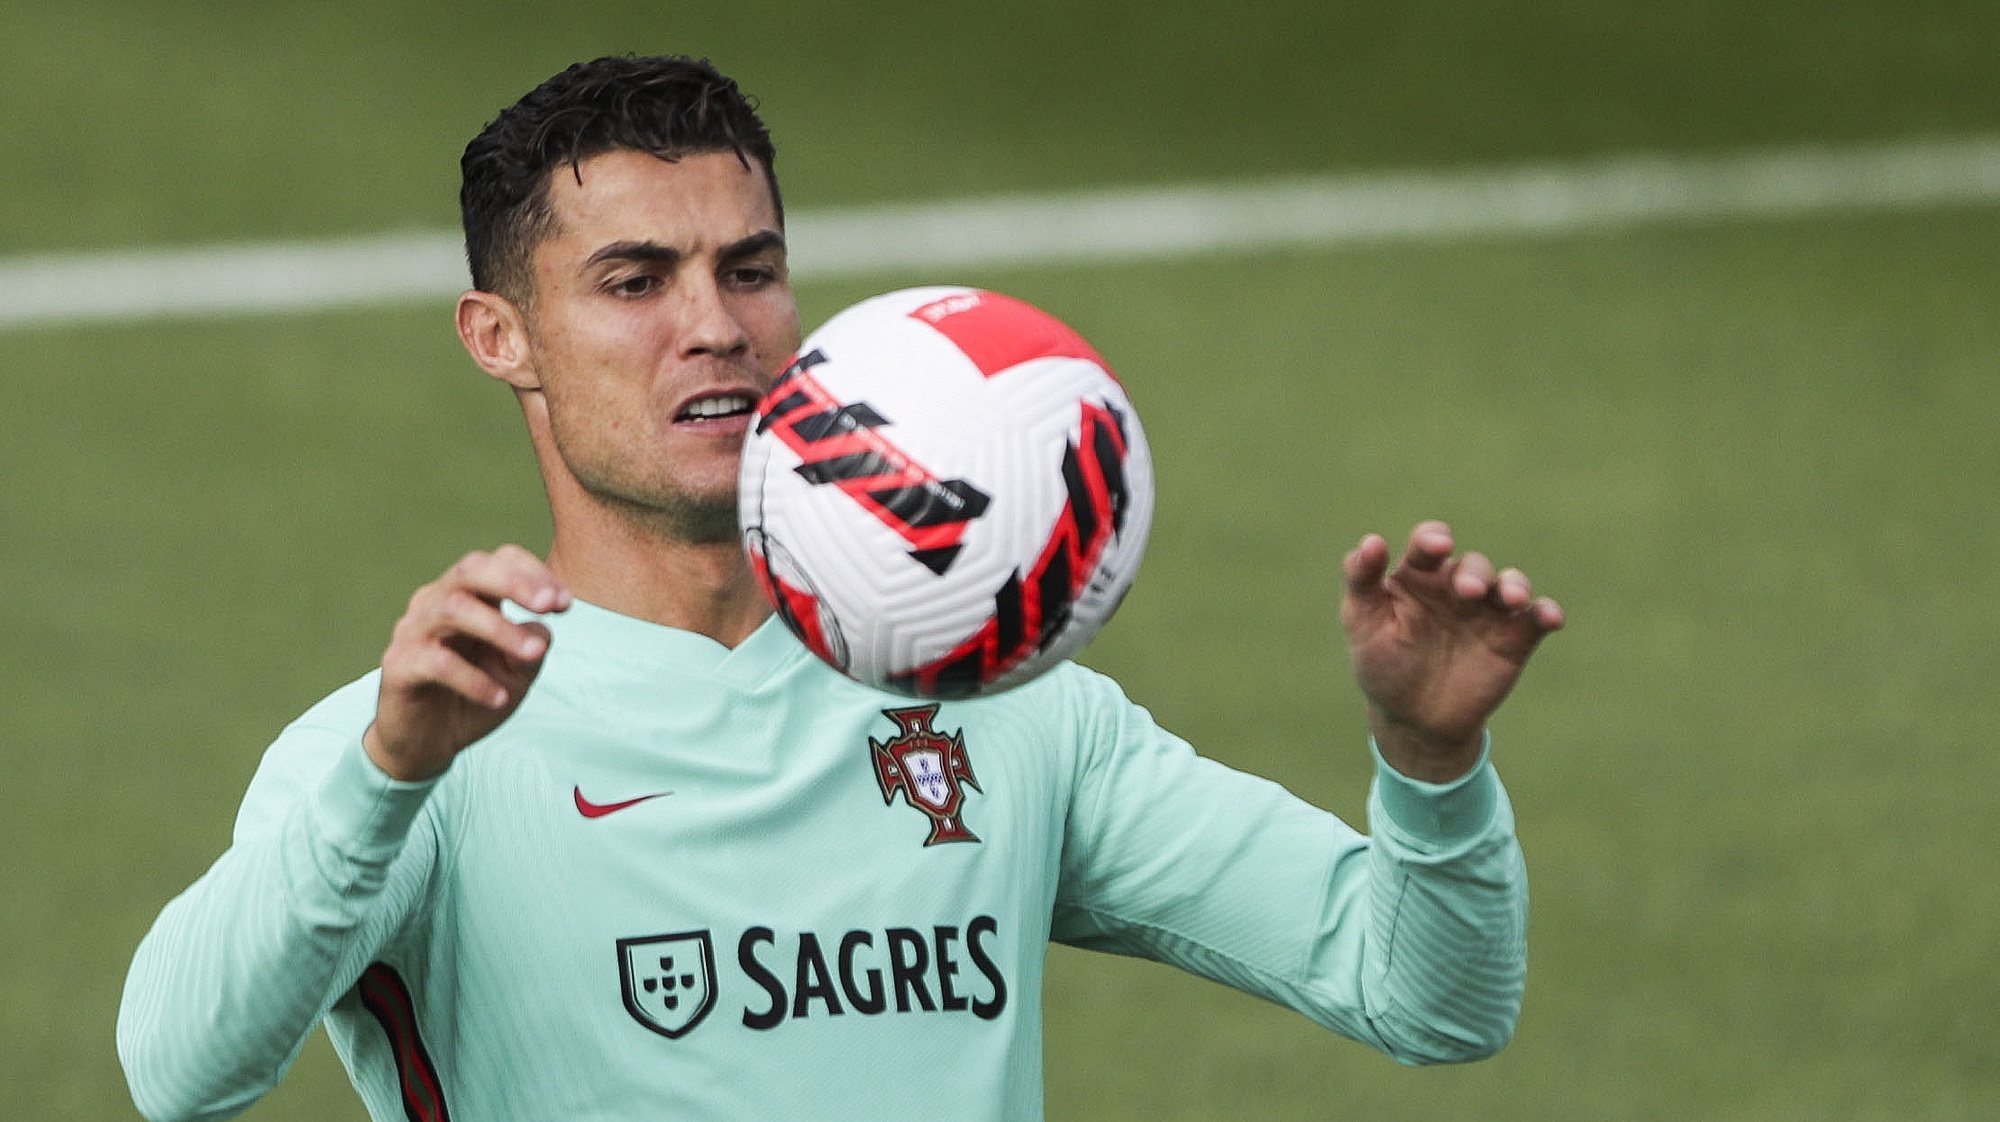 epa09507688 Portuguese soccer player Cristiano Ronaldo in action during Portugal´s national team training session at Oeiras, outskirts of Lisbon, Portugal, 05 October 2021.  EPA/TIAGO PETINGA